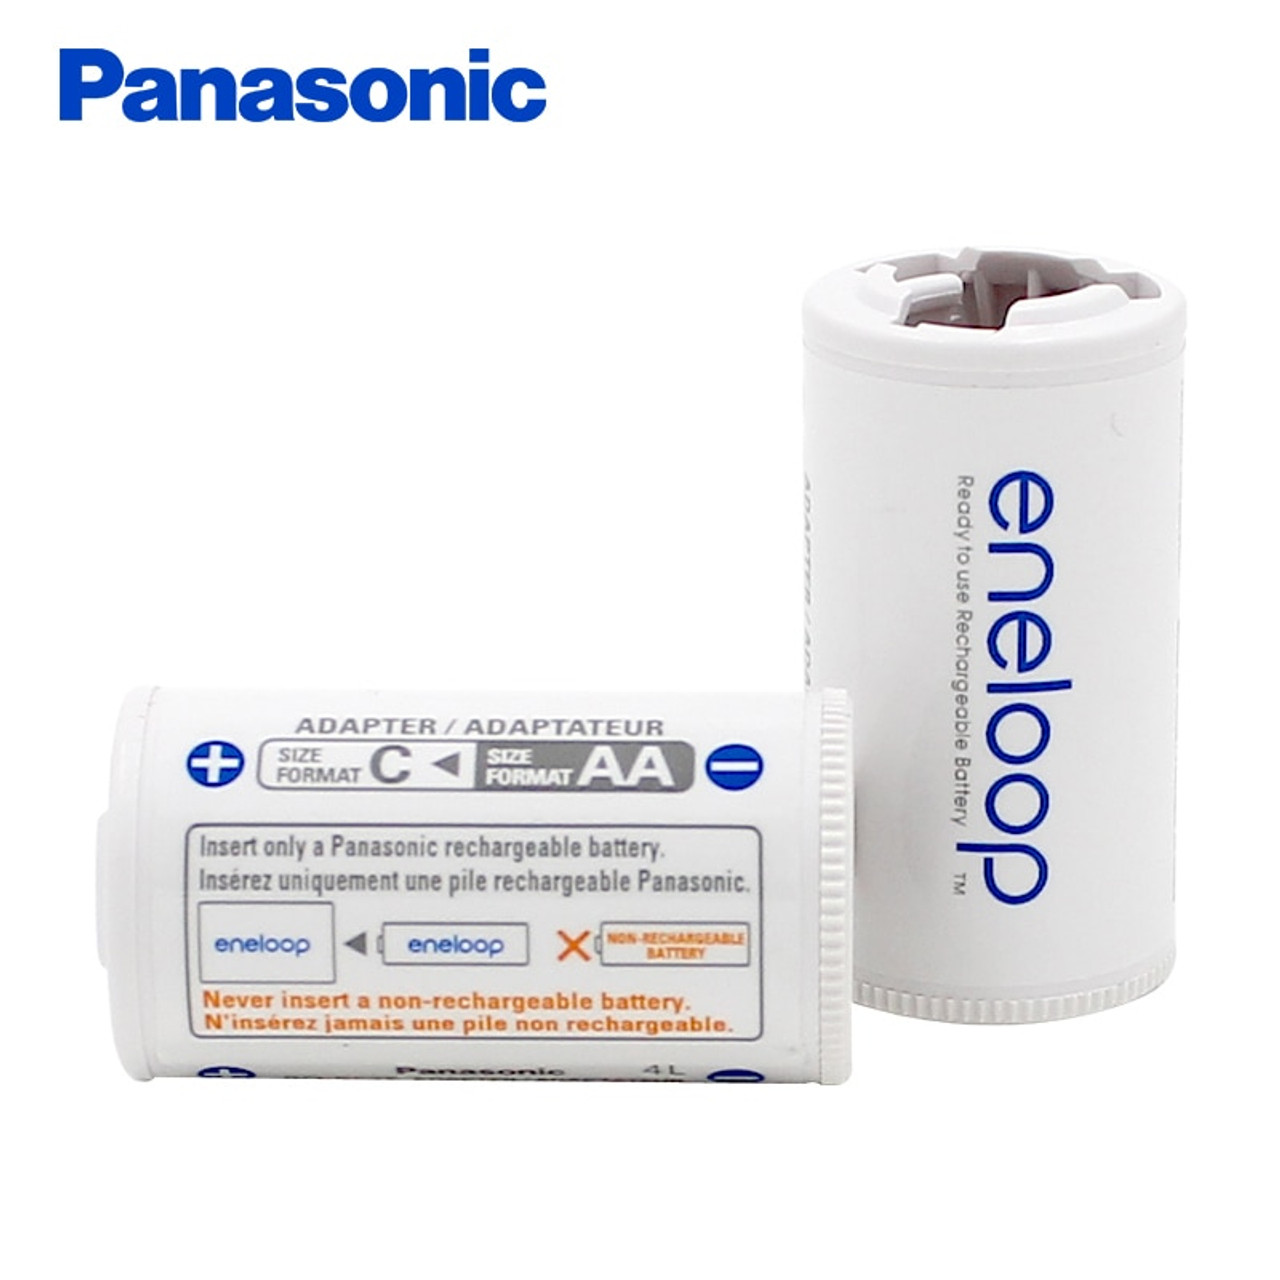 BQ-BS2E4SA - Eneloop C size Cell Spacer AA Battery Converters - 4 Pack